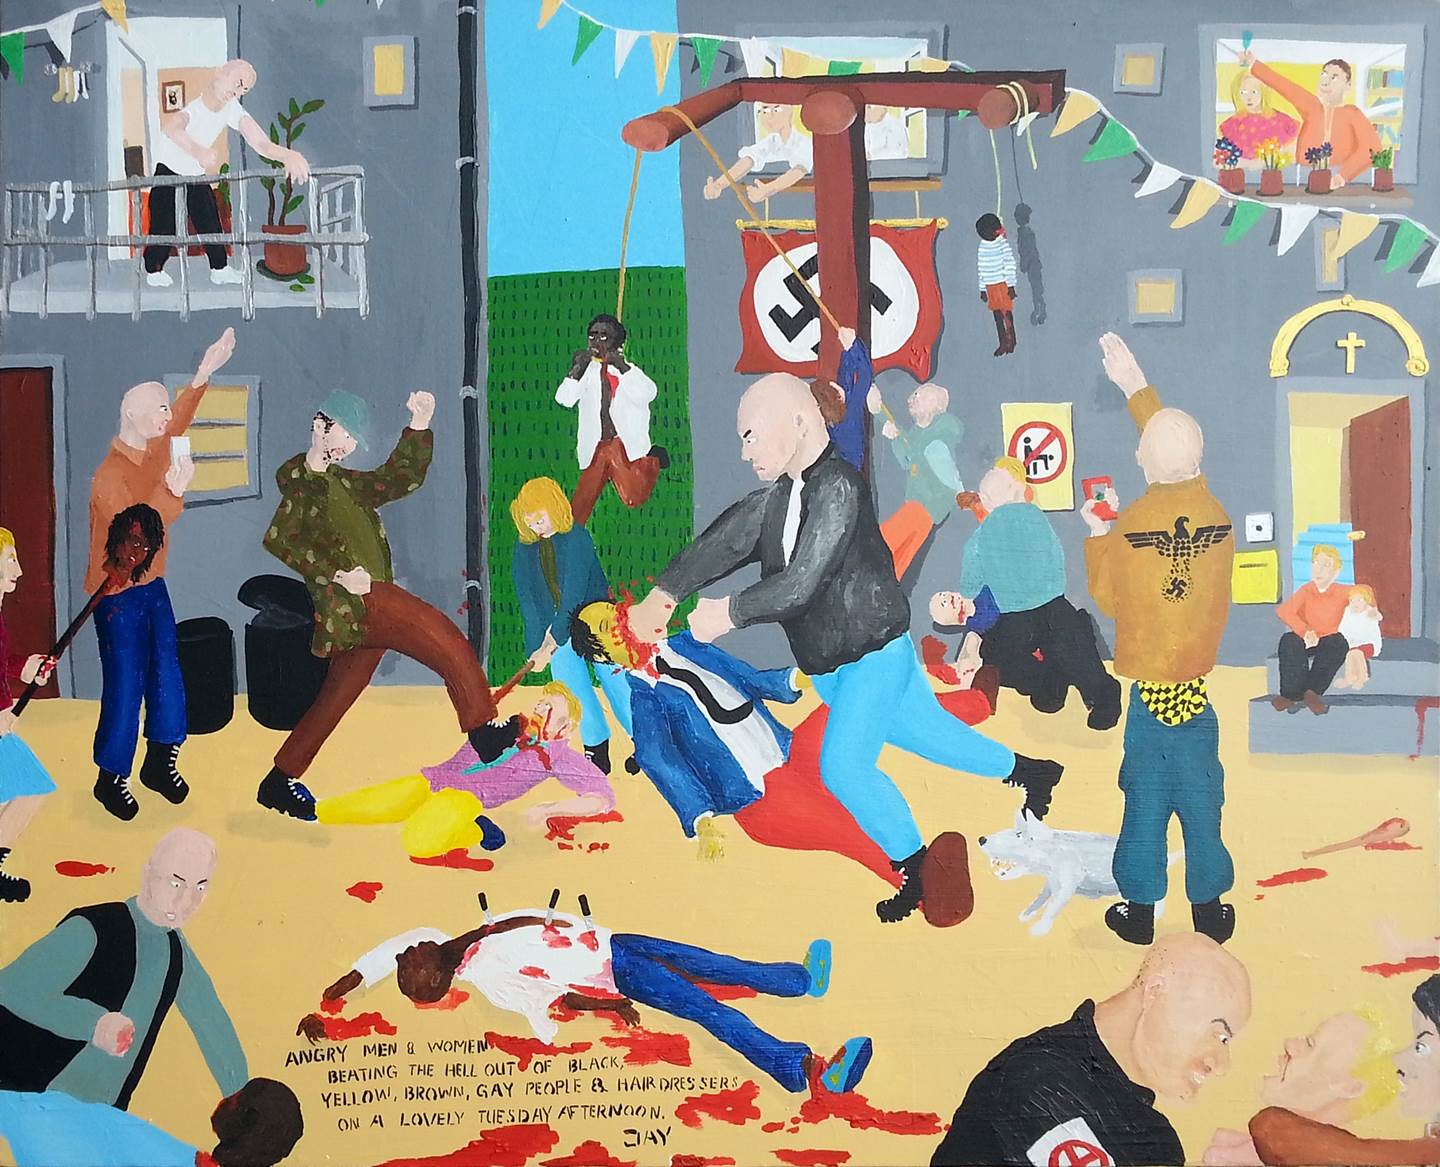 Bad painting number 01: Angry men & women beating the hell out of black, yellow, brown, gay people & hairdressers on a lovely Tuesday afternoon., Pintura Acrílico Vanguarda original por Jay Rechsteiner